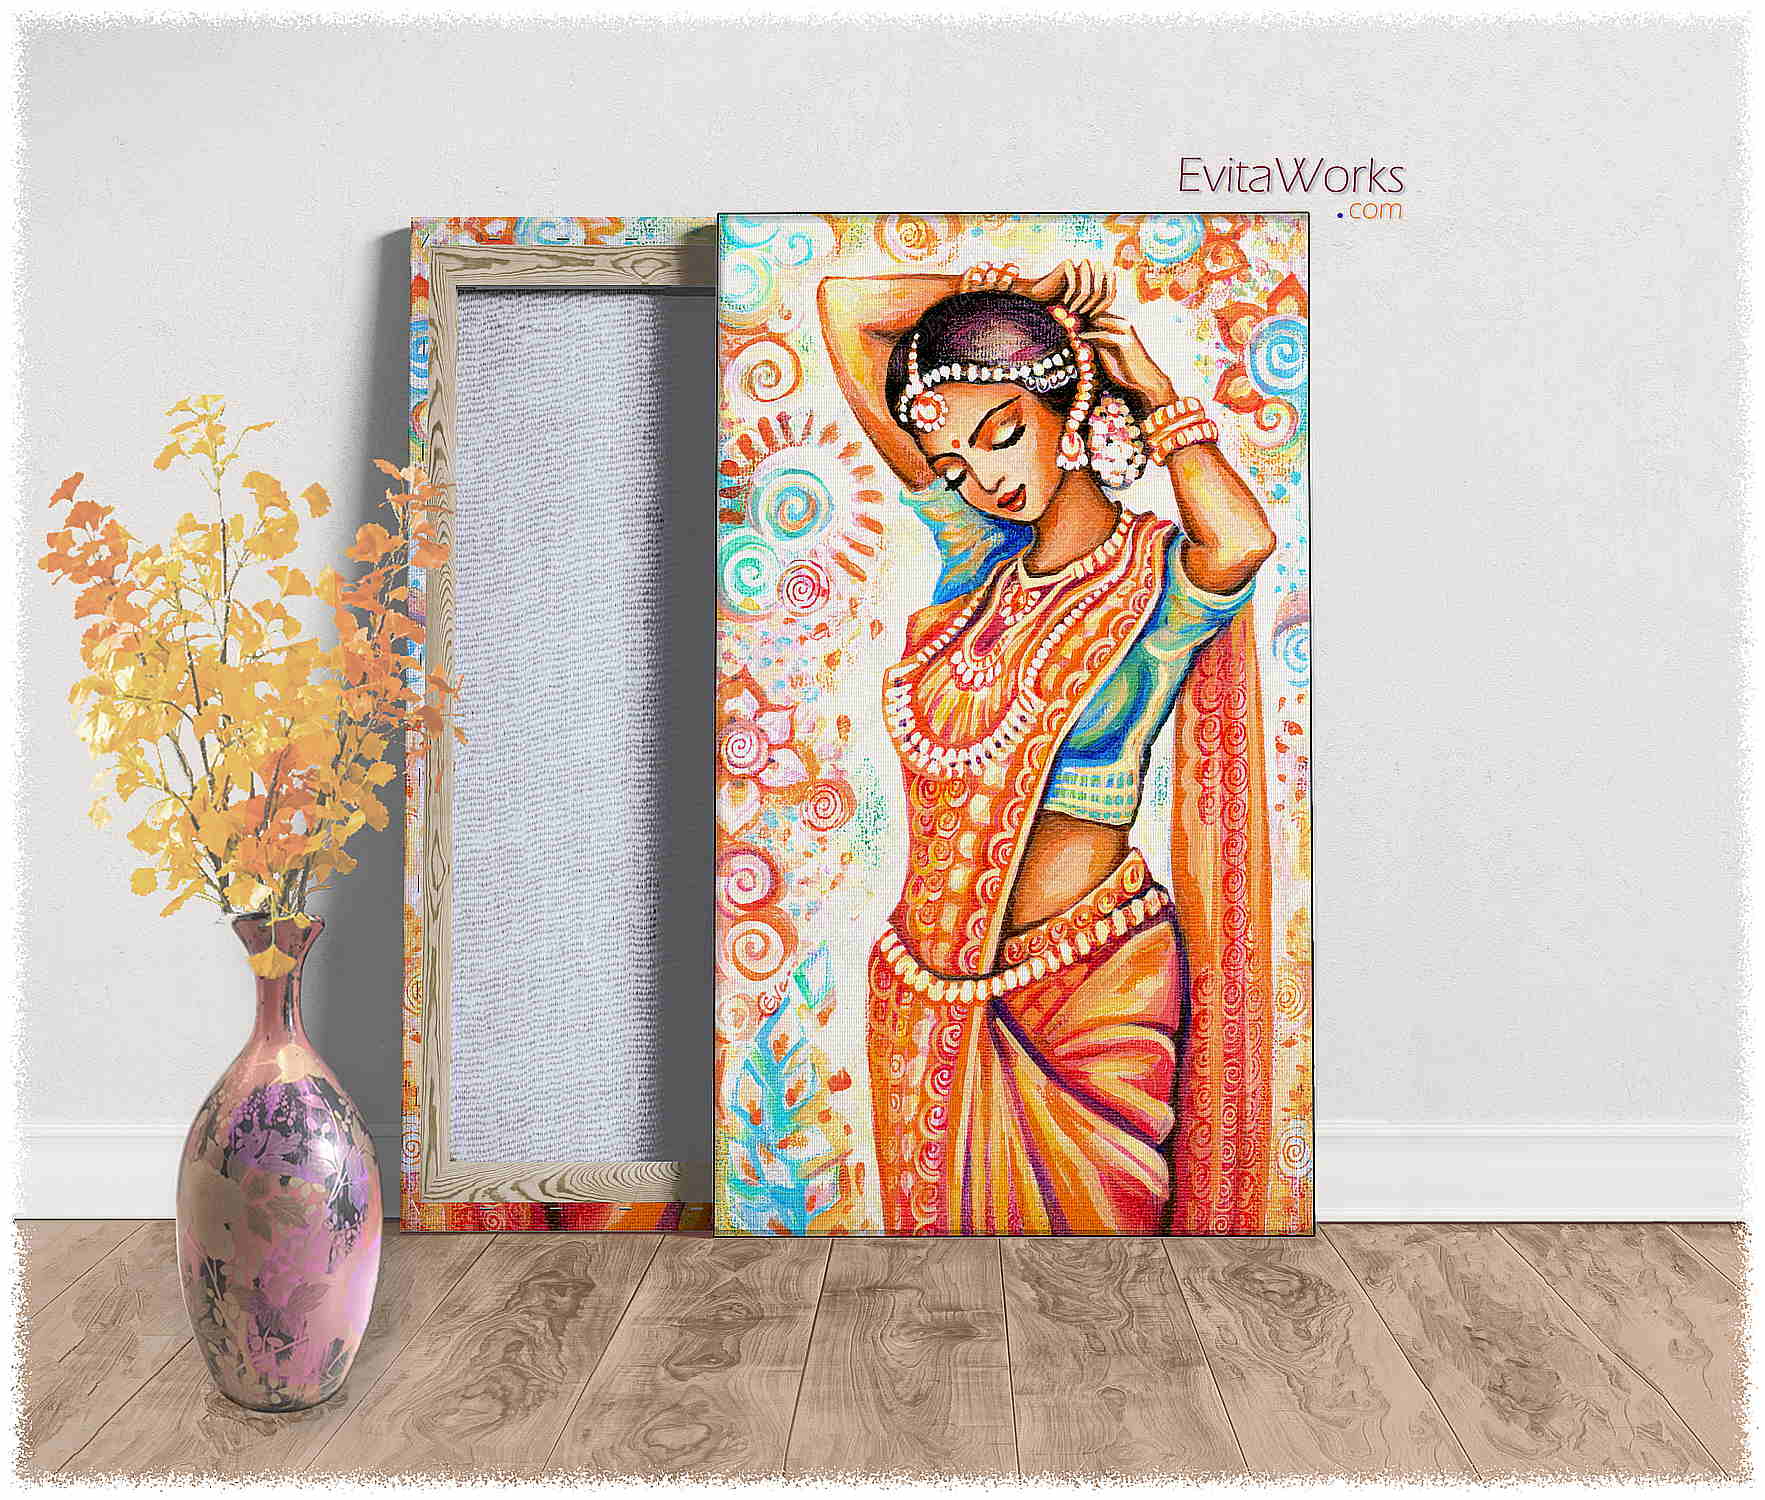 Hit to learn about "Aroma of Saffron, Indian girl" on canvases